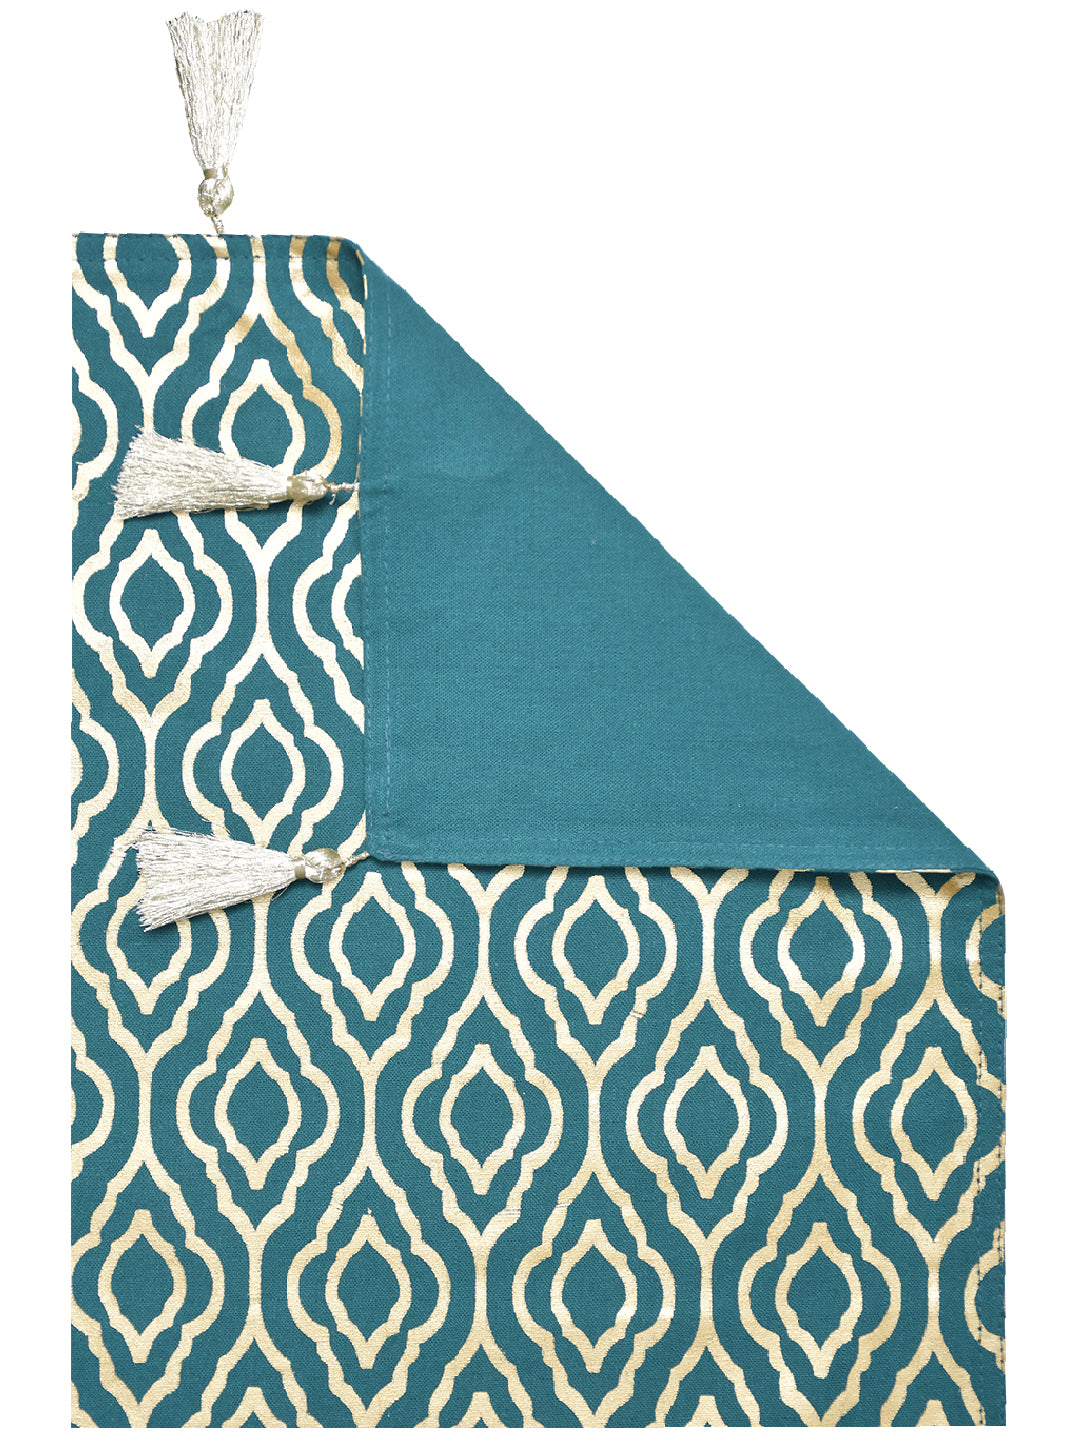 Roshan Teal Colored 100% Cotton Printed 4/6 Seater Table Runner